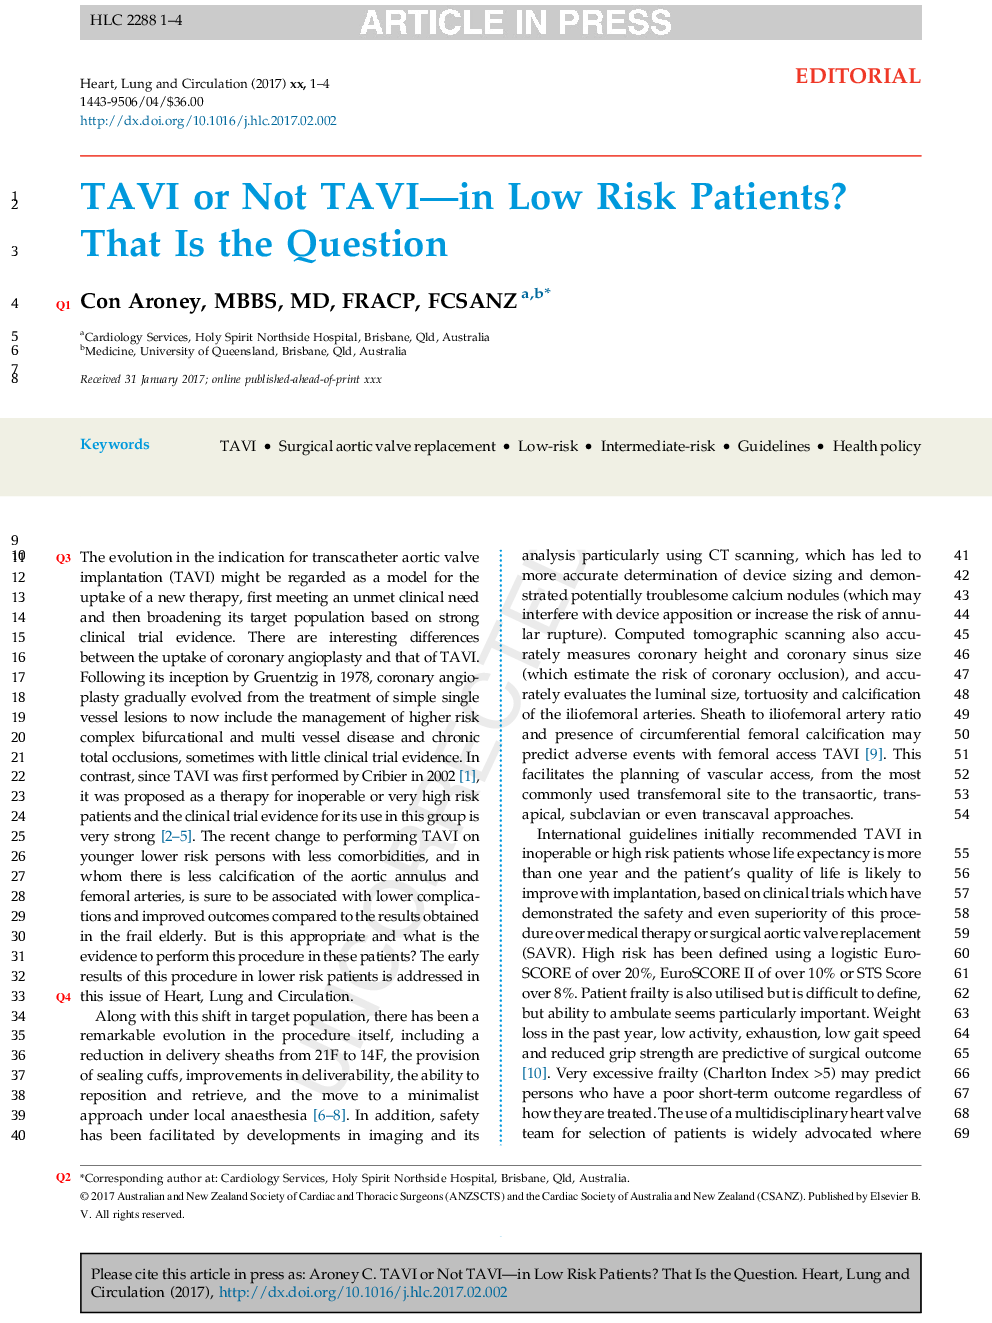 TAVI or Not TAVI-in Low Risk Patients? That Is the Question